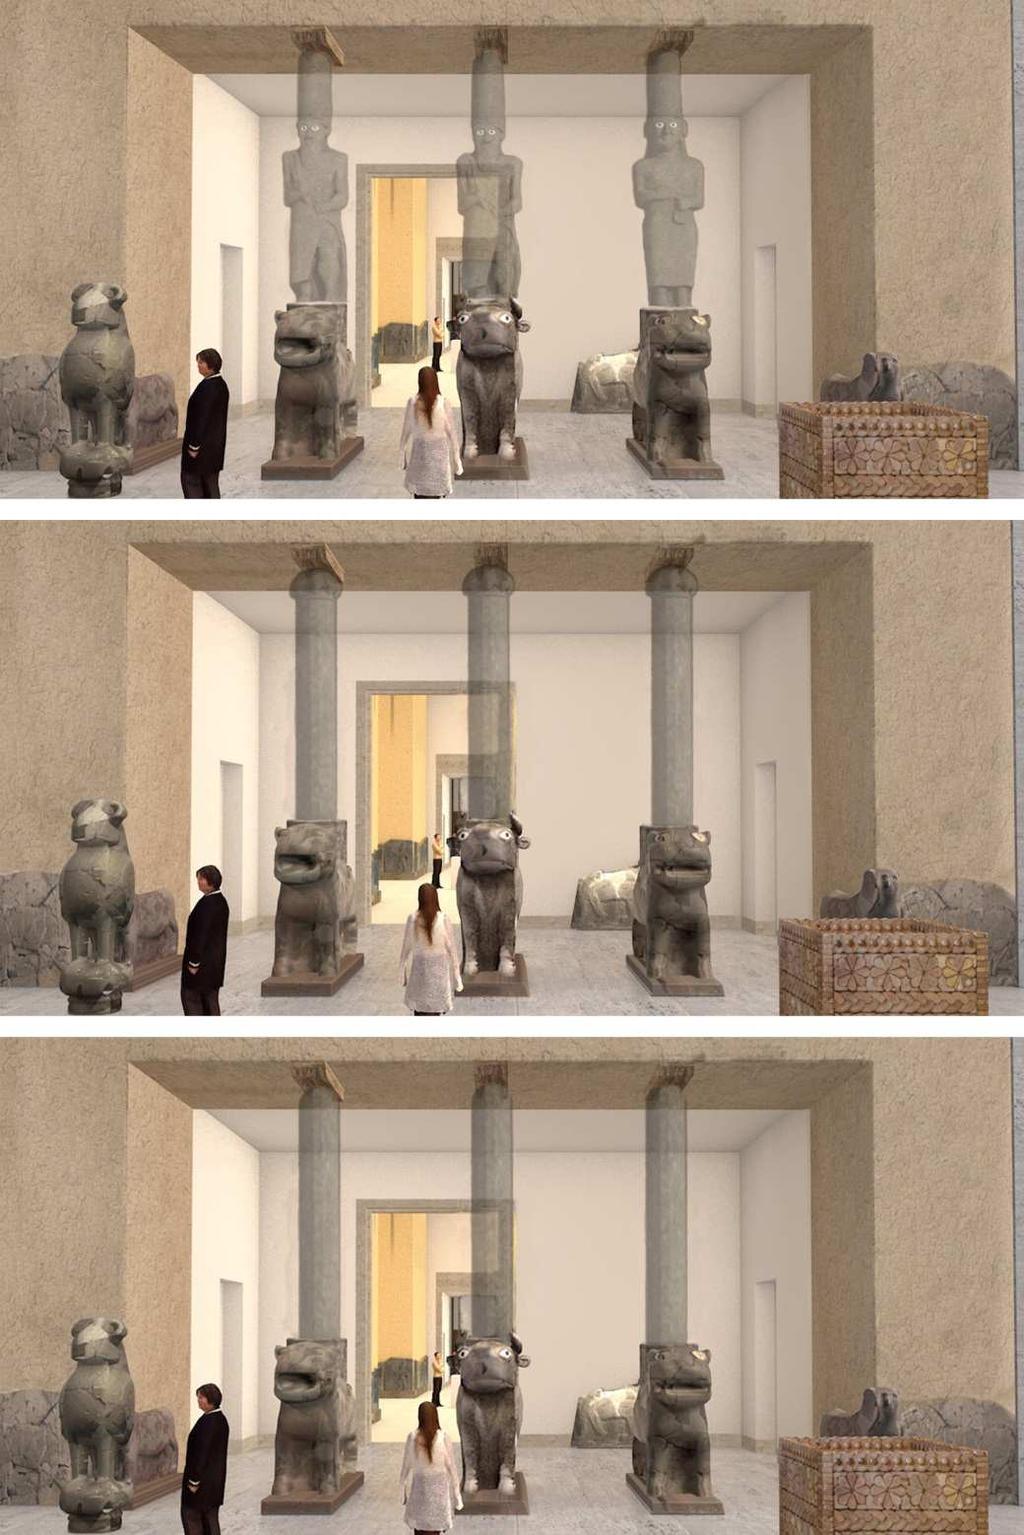 Schmid Material monumentality or virtual multiplicity The unsecured parts - statues, columns with or without capitals, made by stone or wood - could be added in alternation virtually by head-mounted